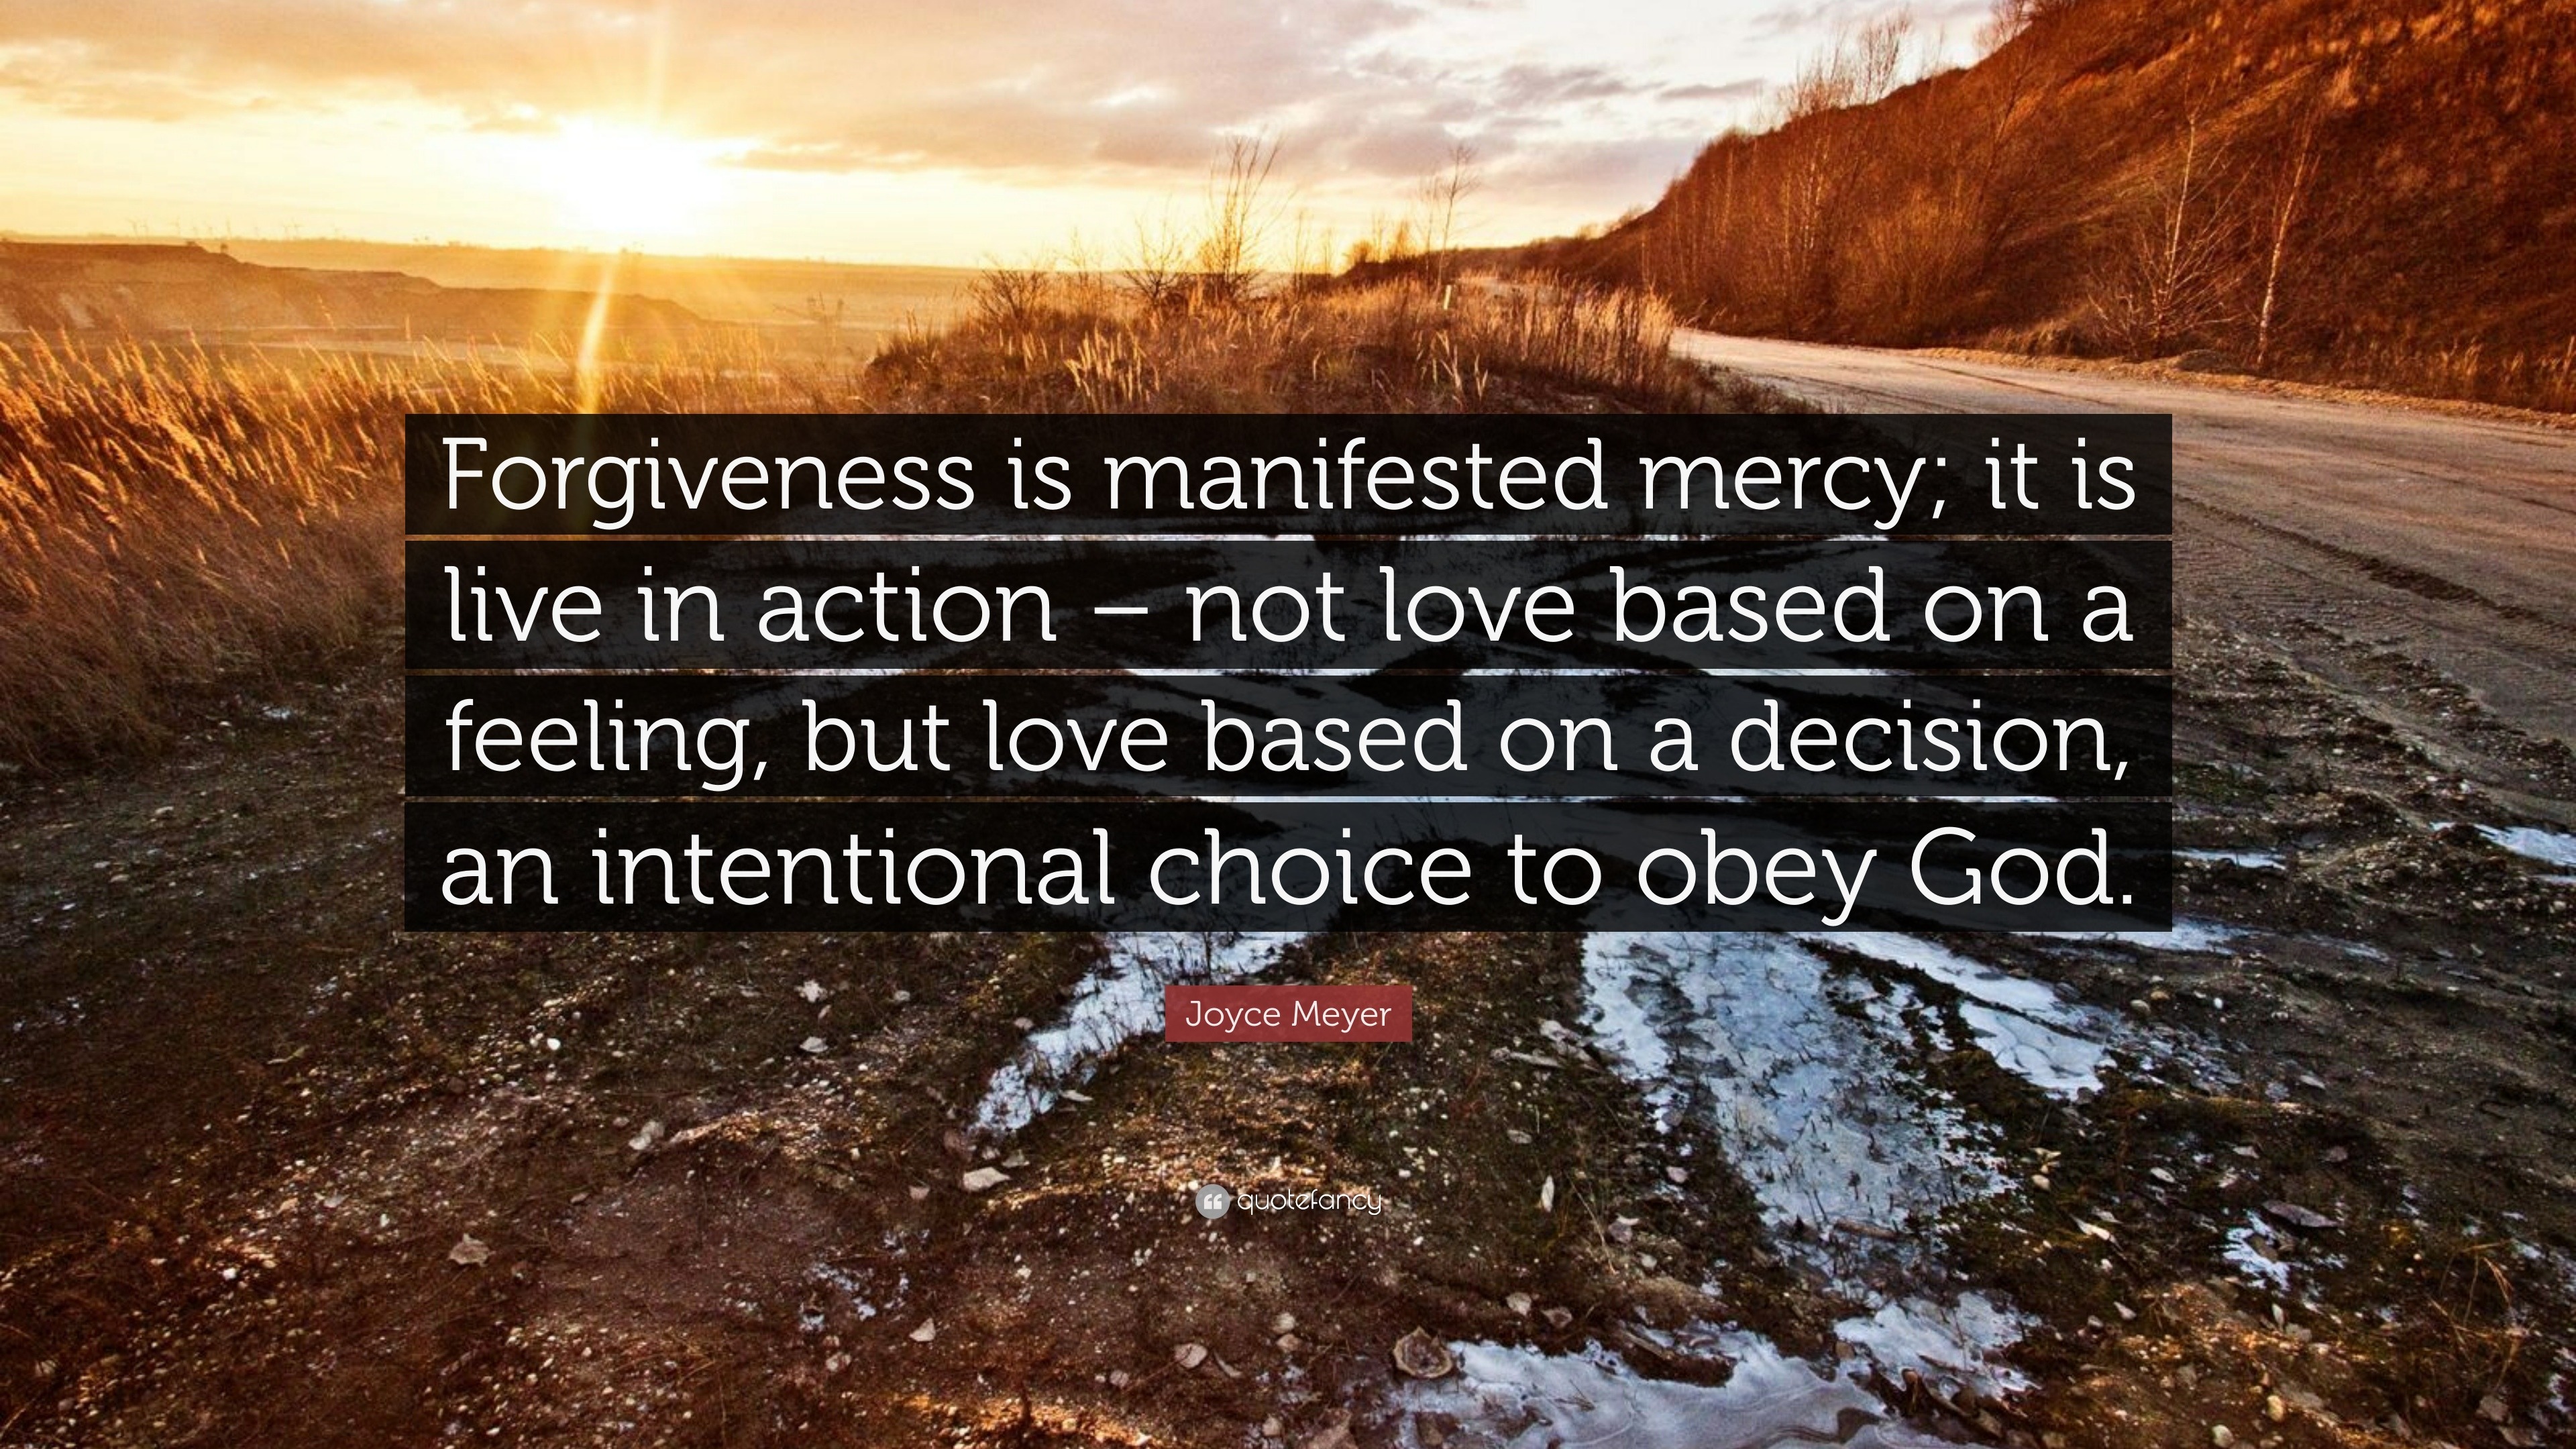 Joyce Meyer Quote “forgiveness Is Manifested Mercy It Is Live In Action Not Love Based On A